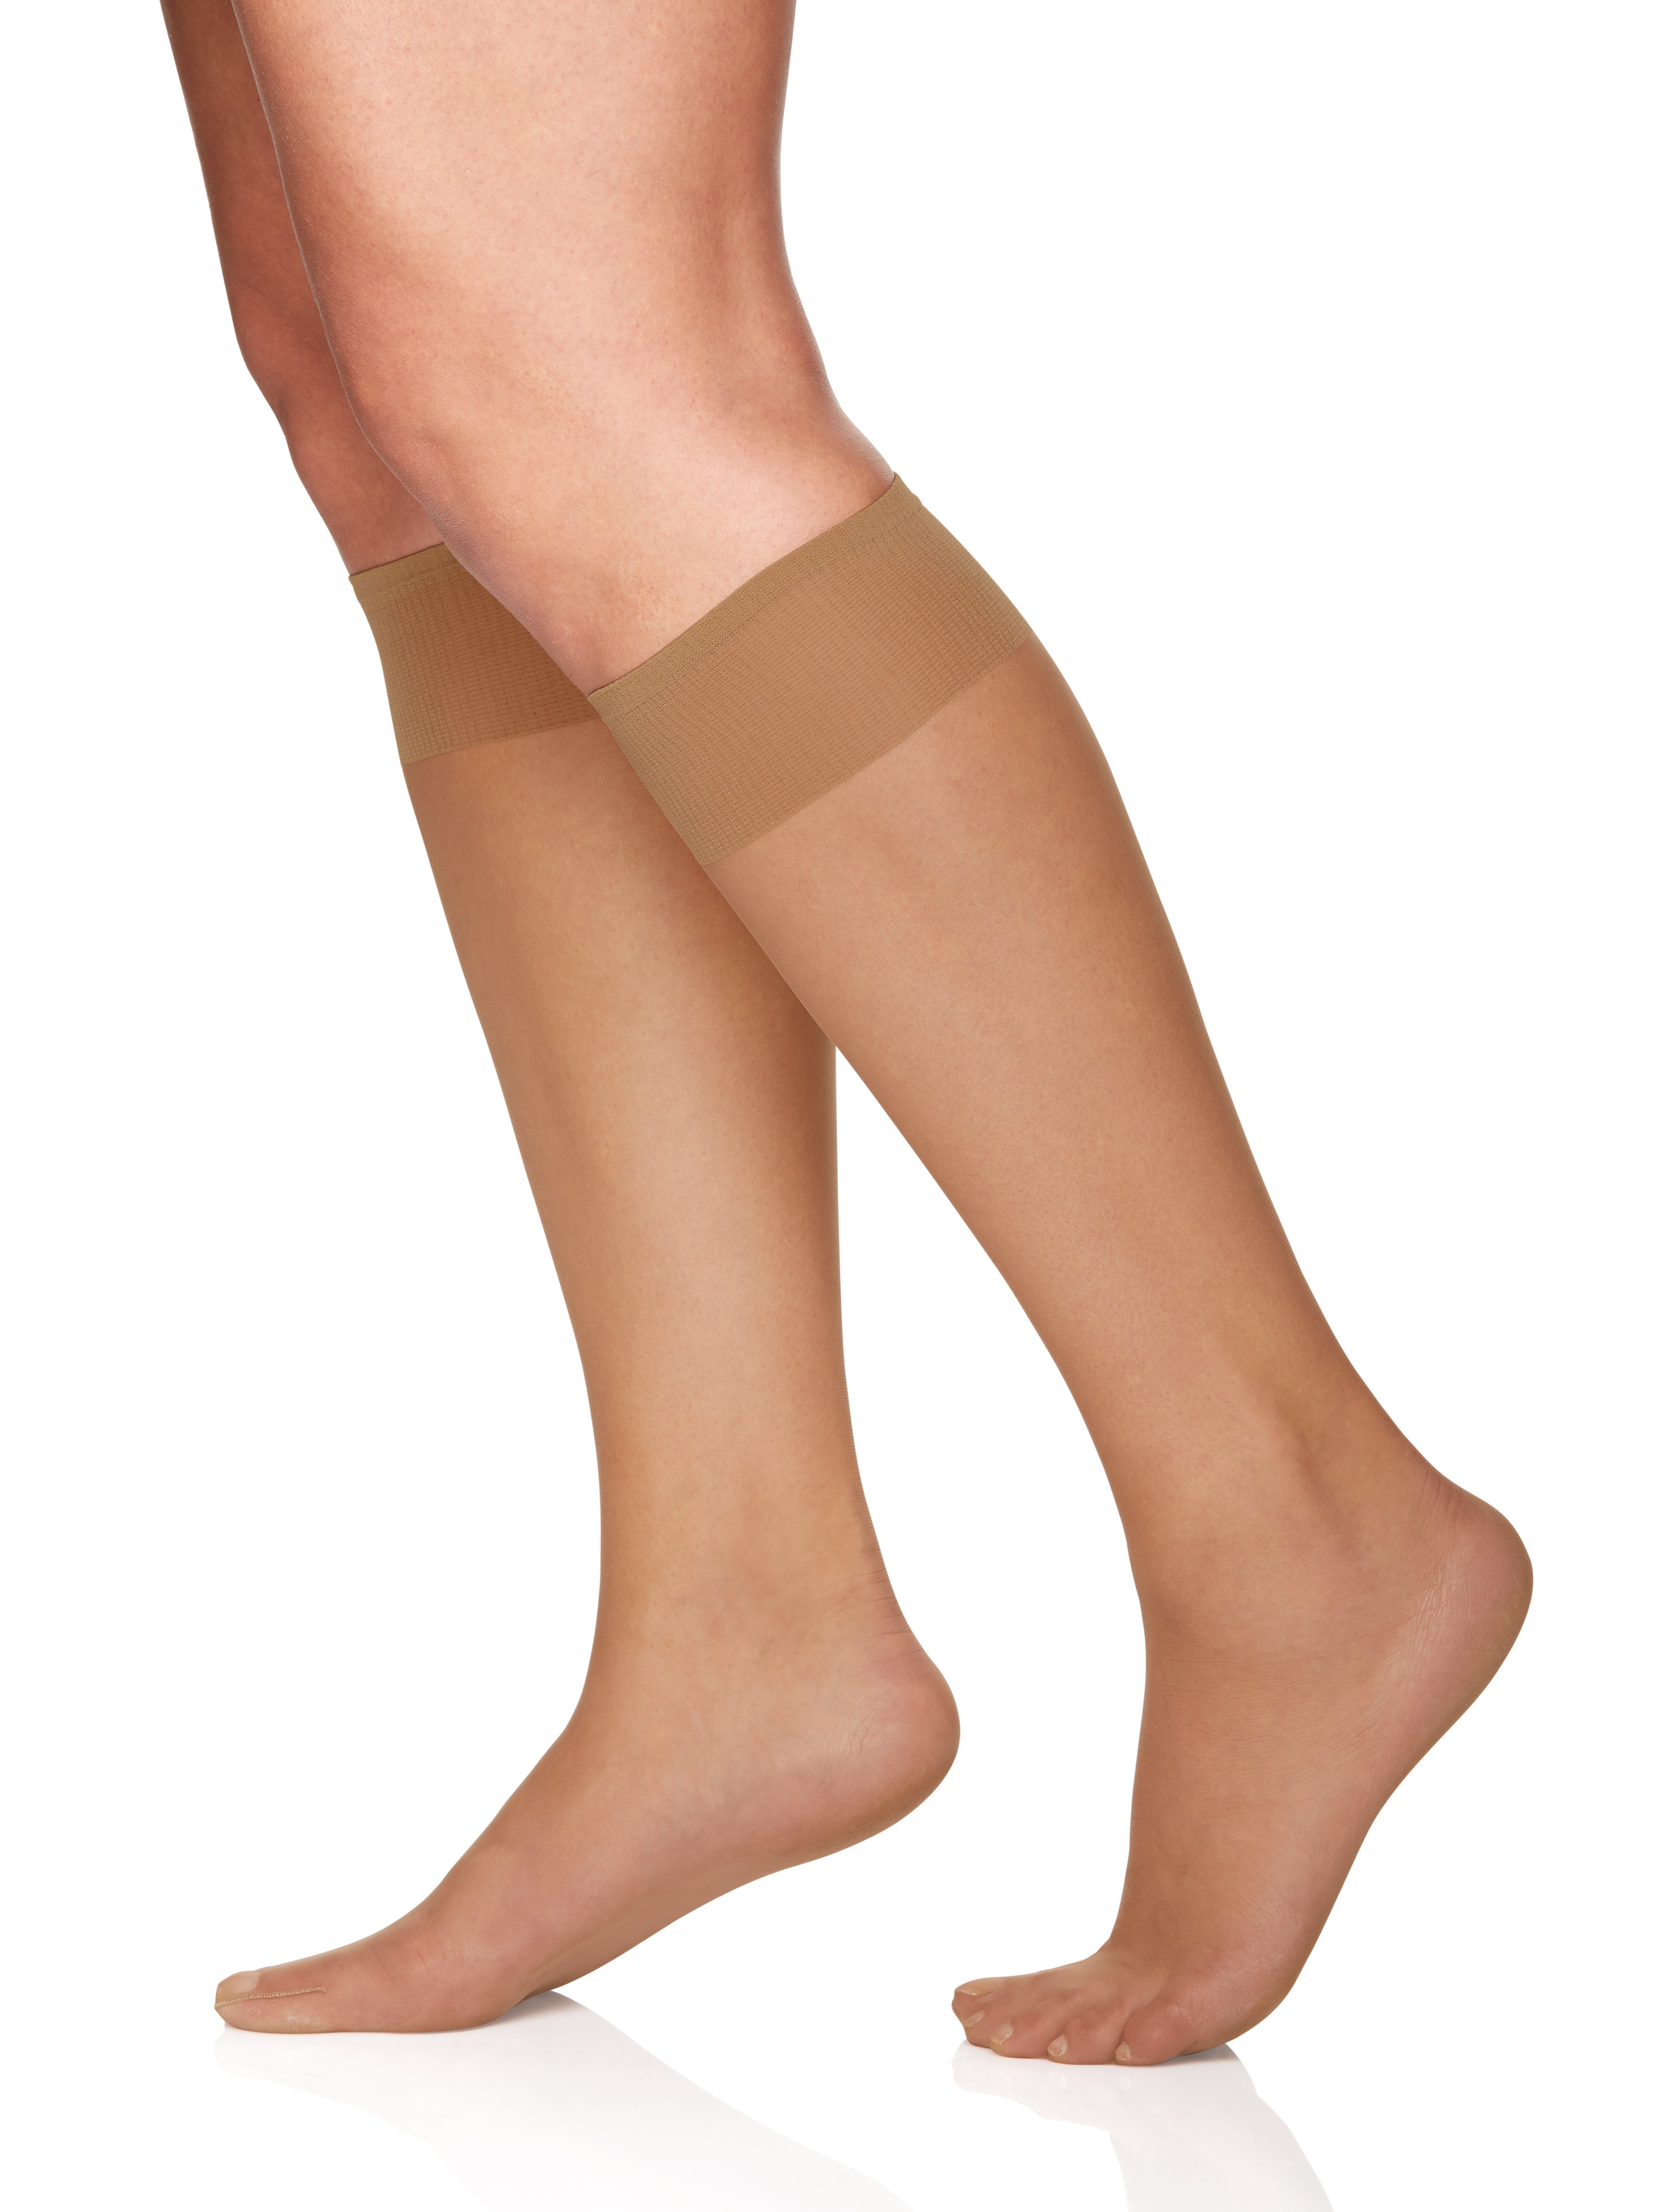 Queen Ultra Sheer Knee High with Sandalfoot Toe - 6460